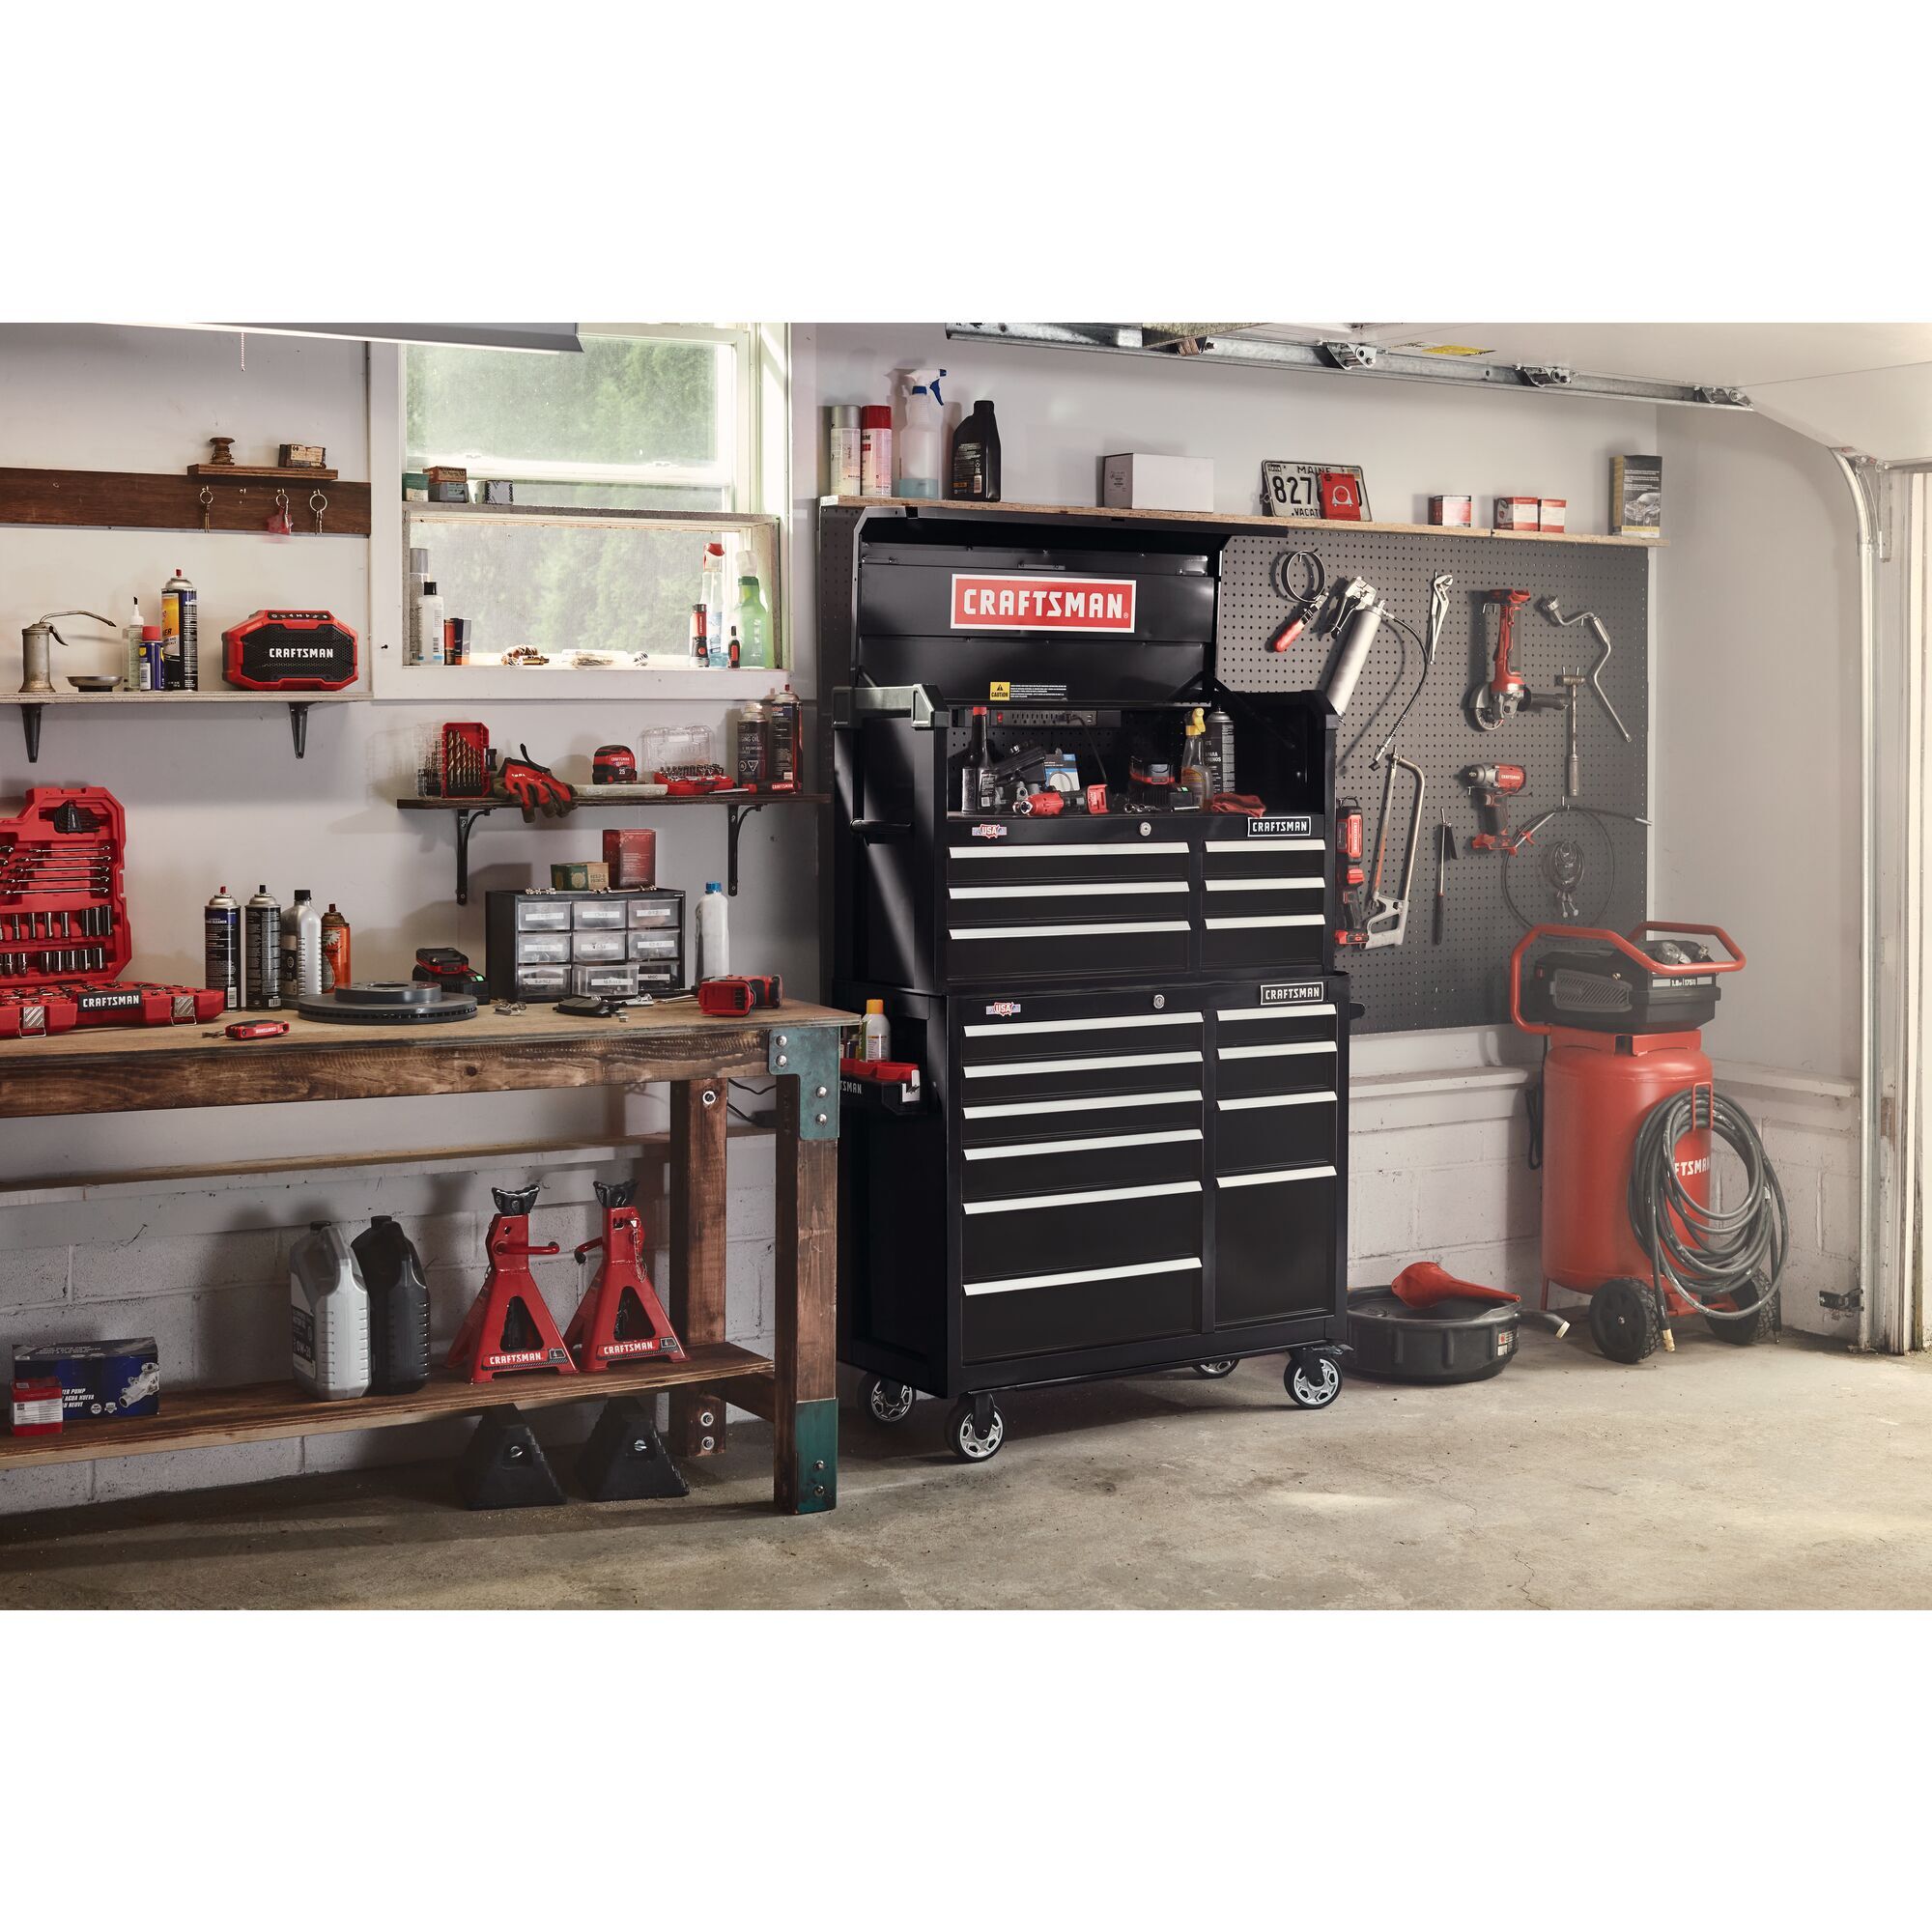 View of CRAFTSMAN Storage: Cabinets & Chests Rolling family of products